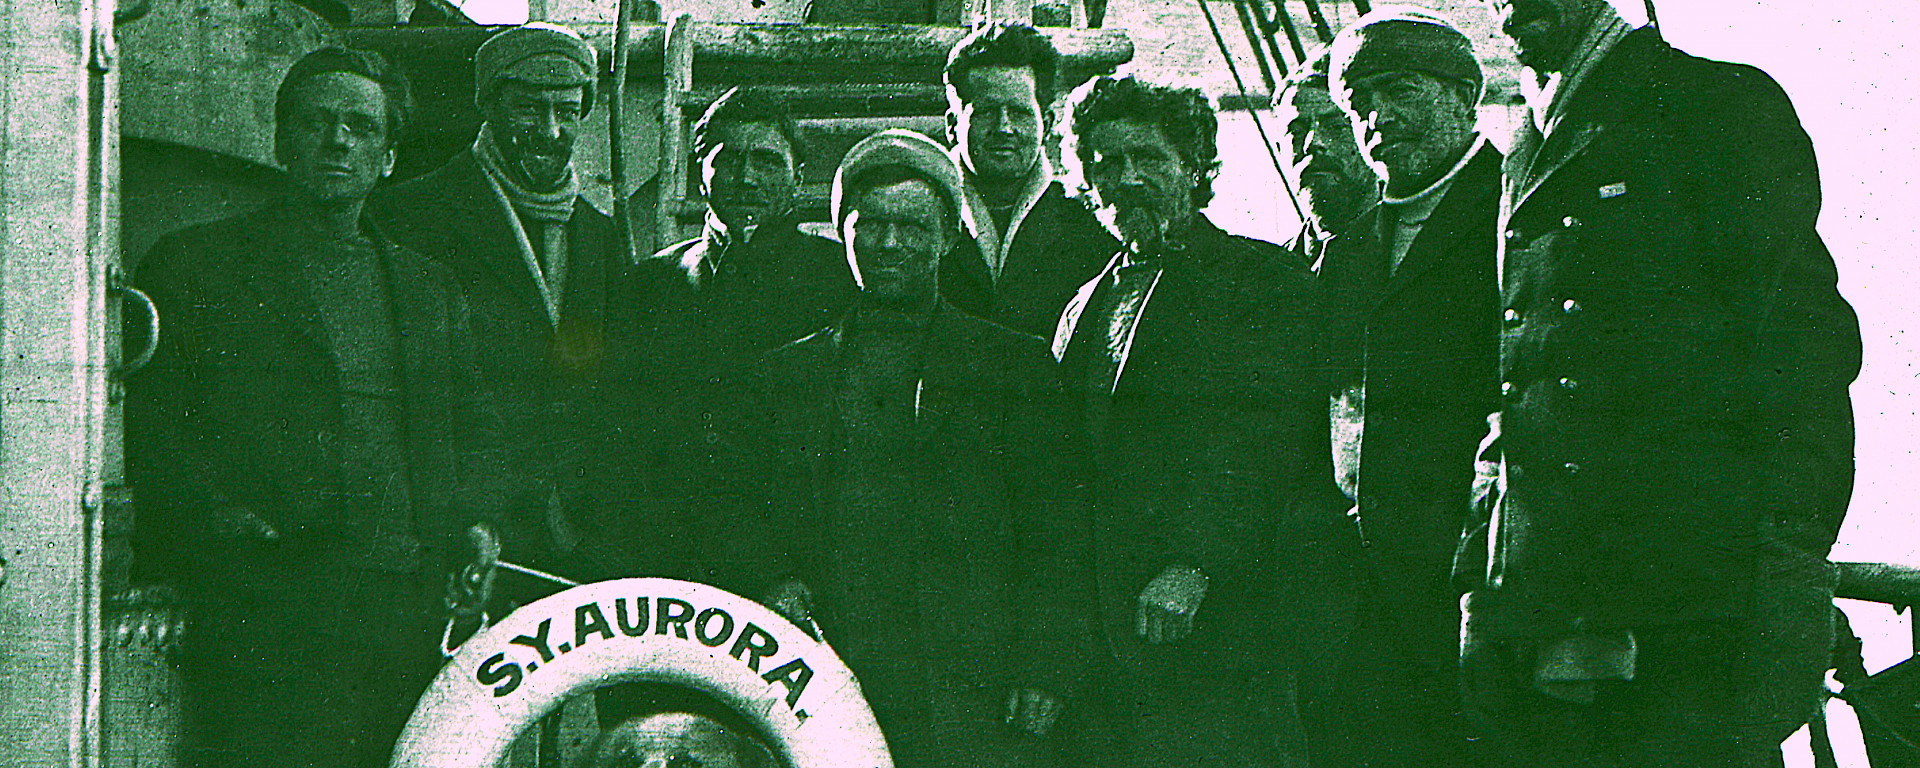 A group of people onboard a ship.